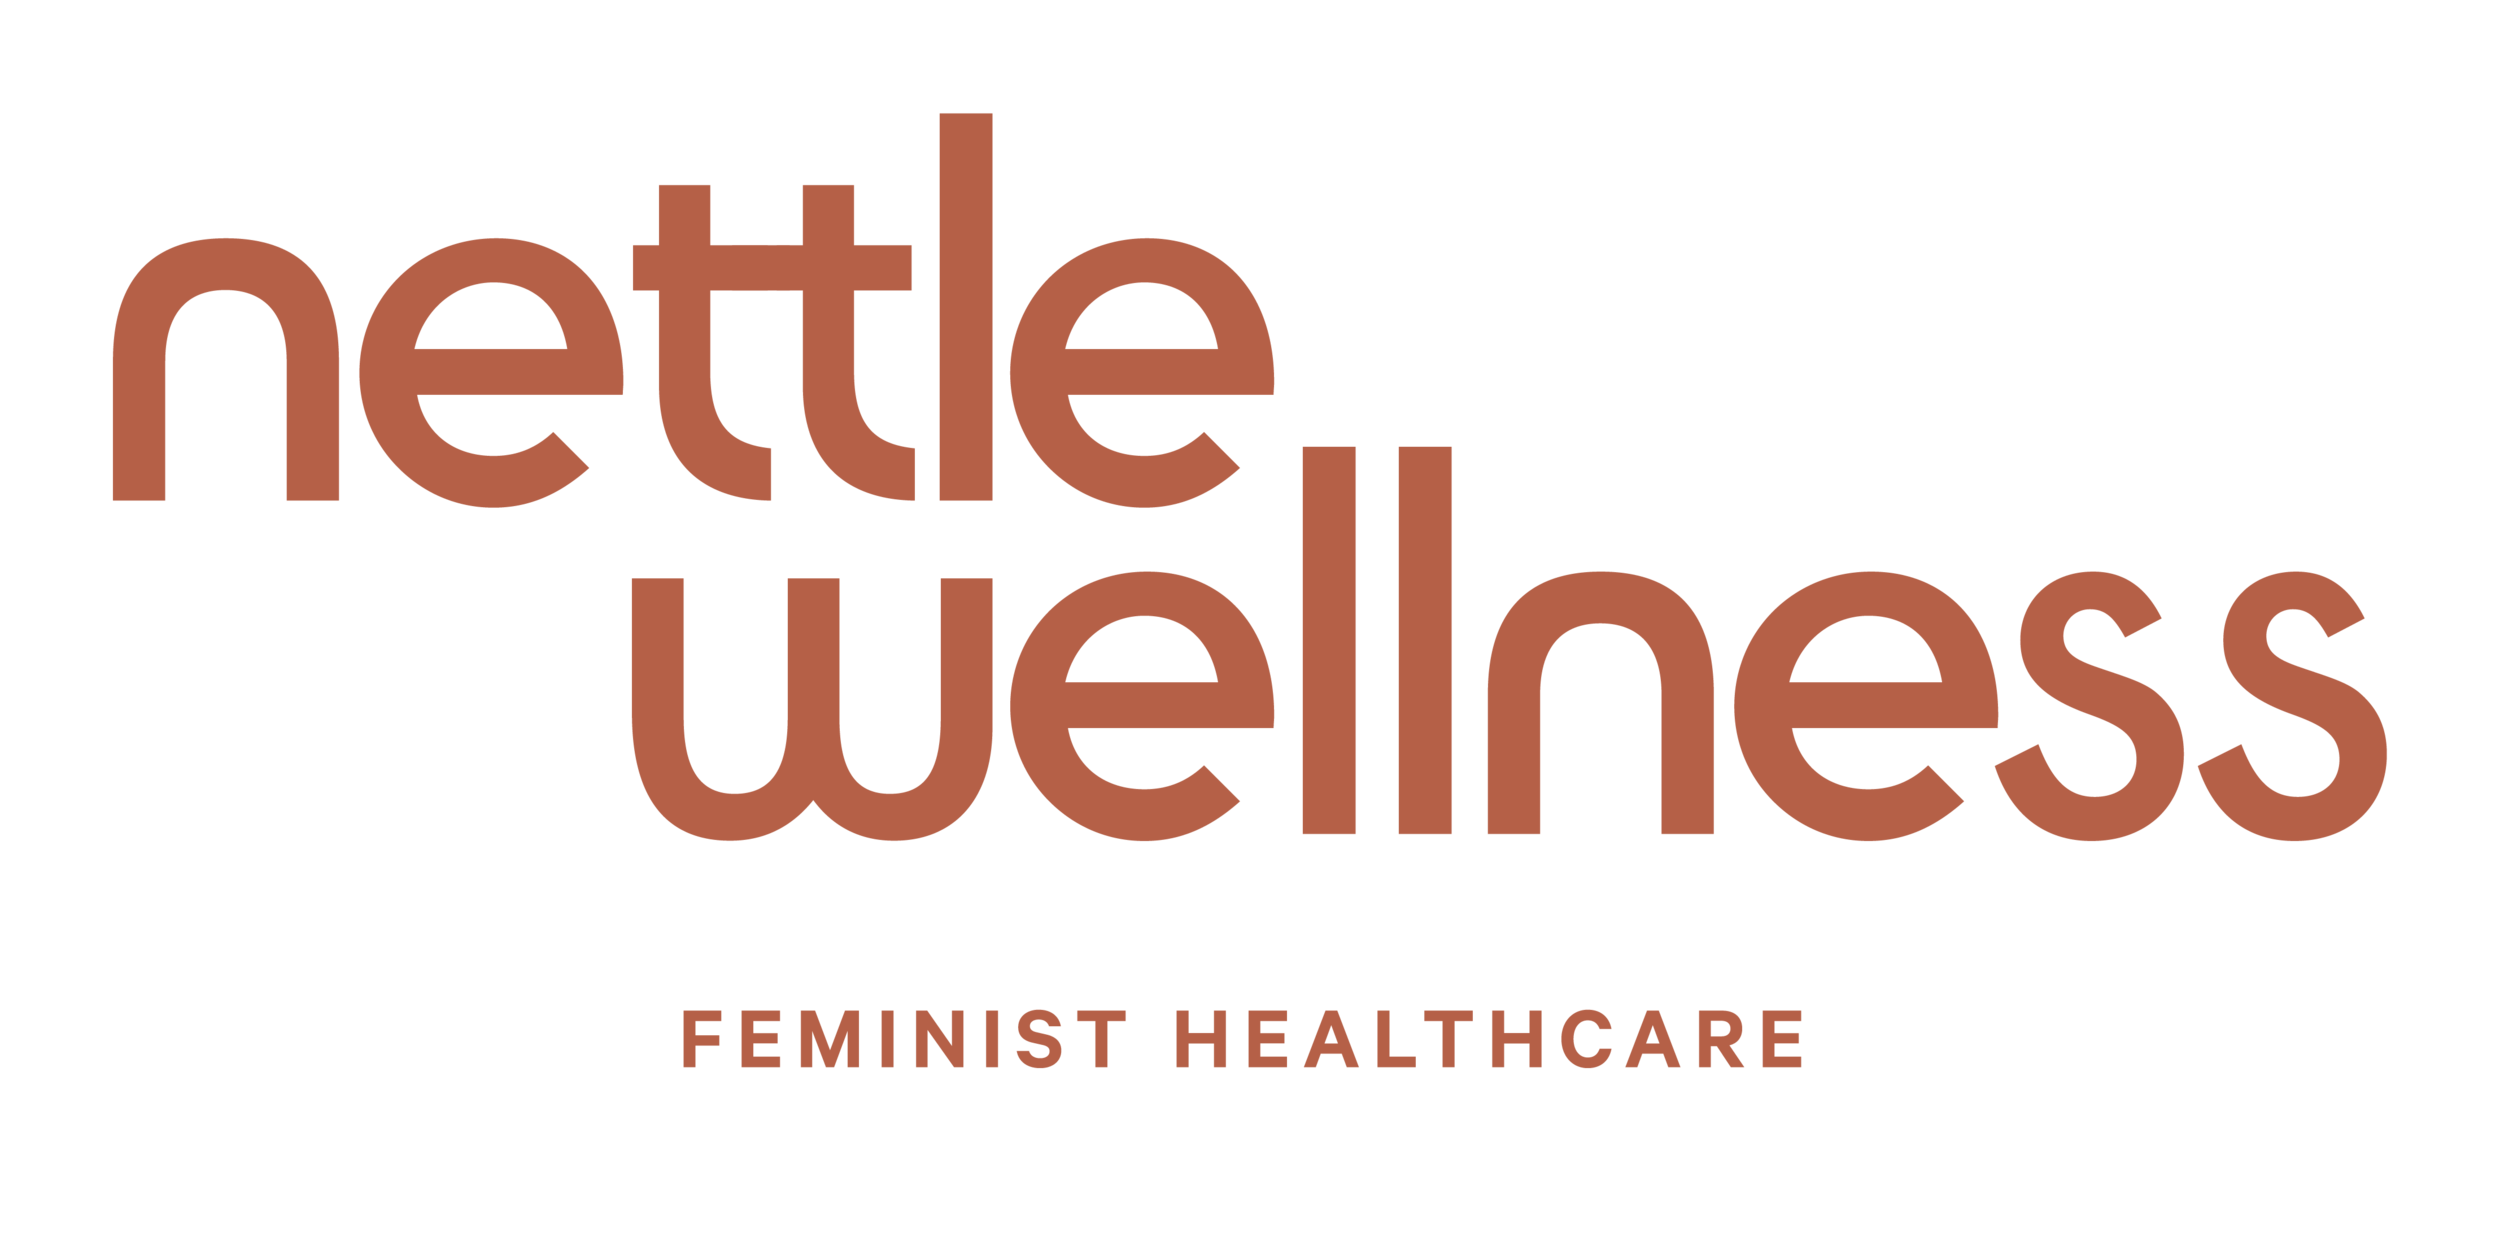 Nettle Wellness | Home Birth Services &amp; Natural Childbirth with Certified Nurse Midwives in New York